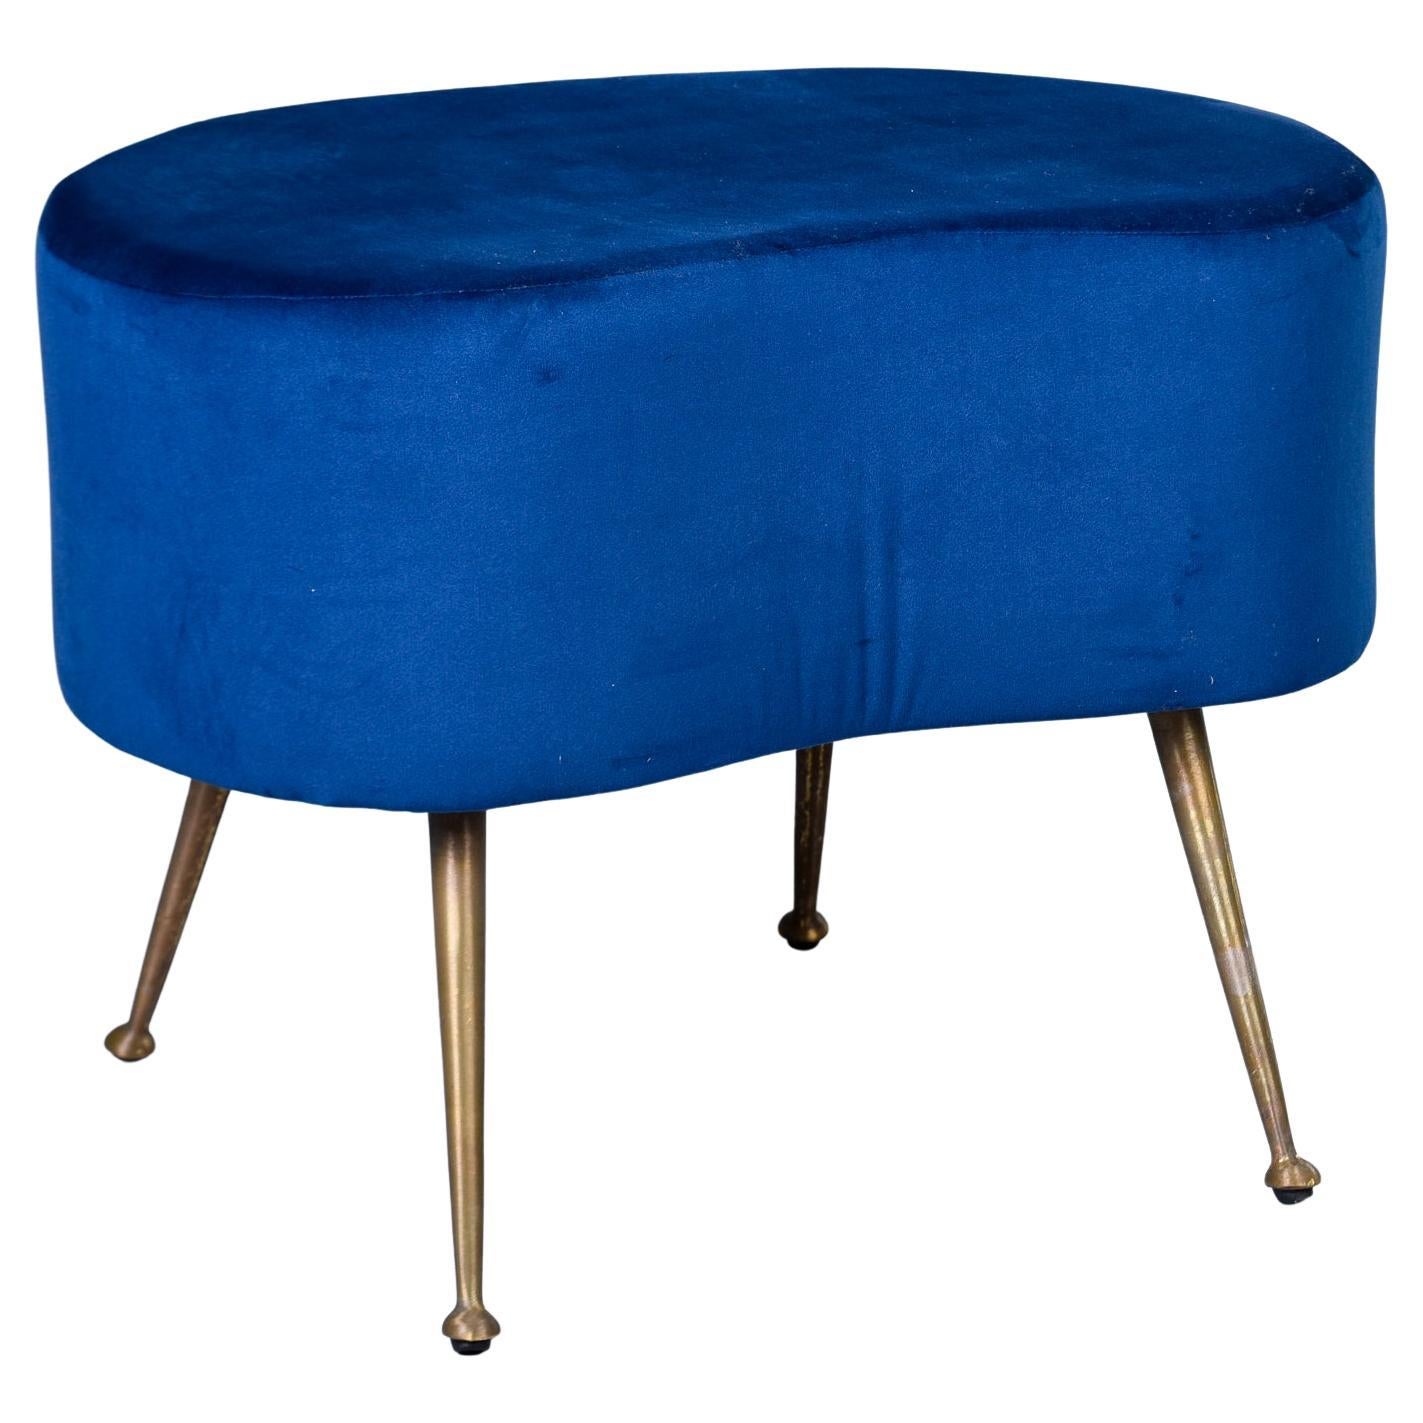 Italian Mid Century Blue Kidney Shaped Stool with Brass Legs For Sale